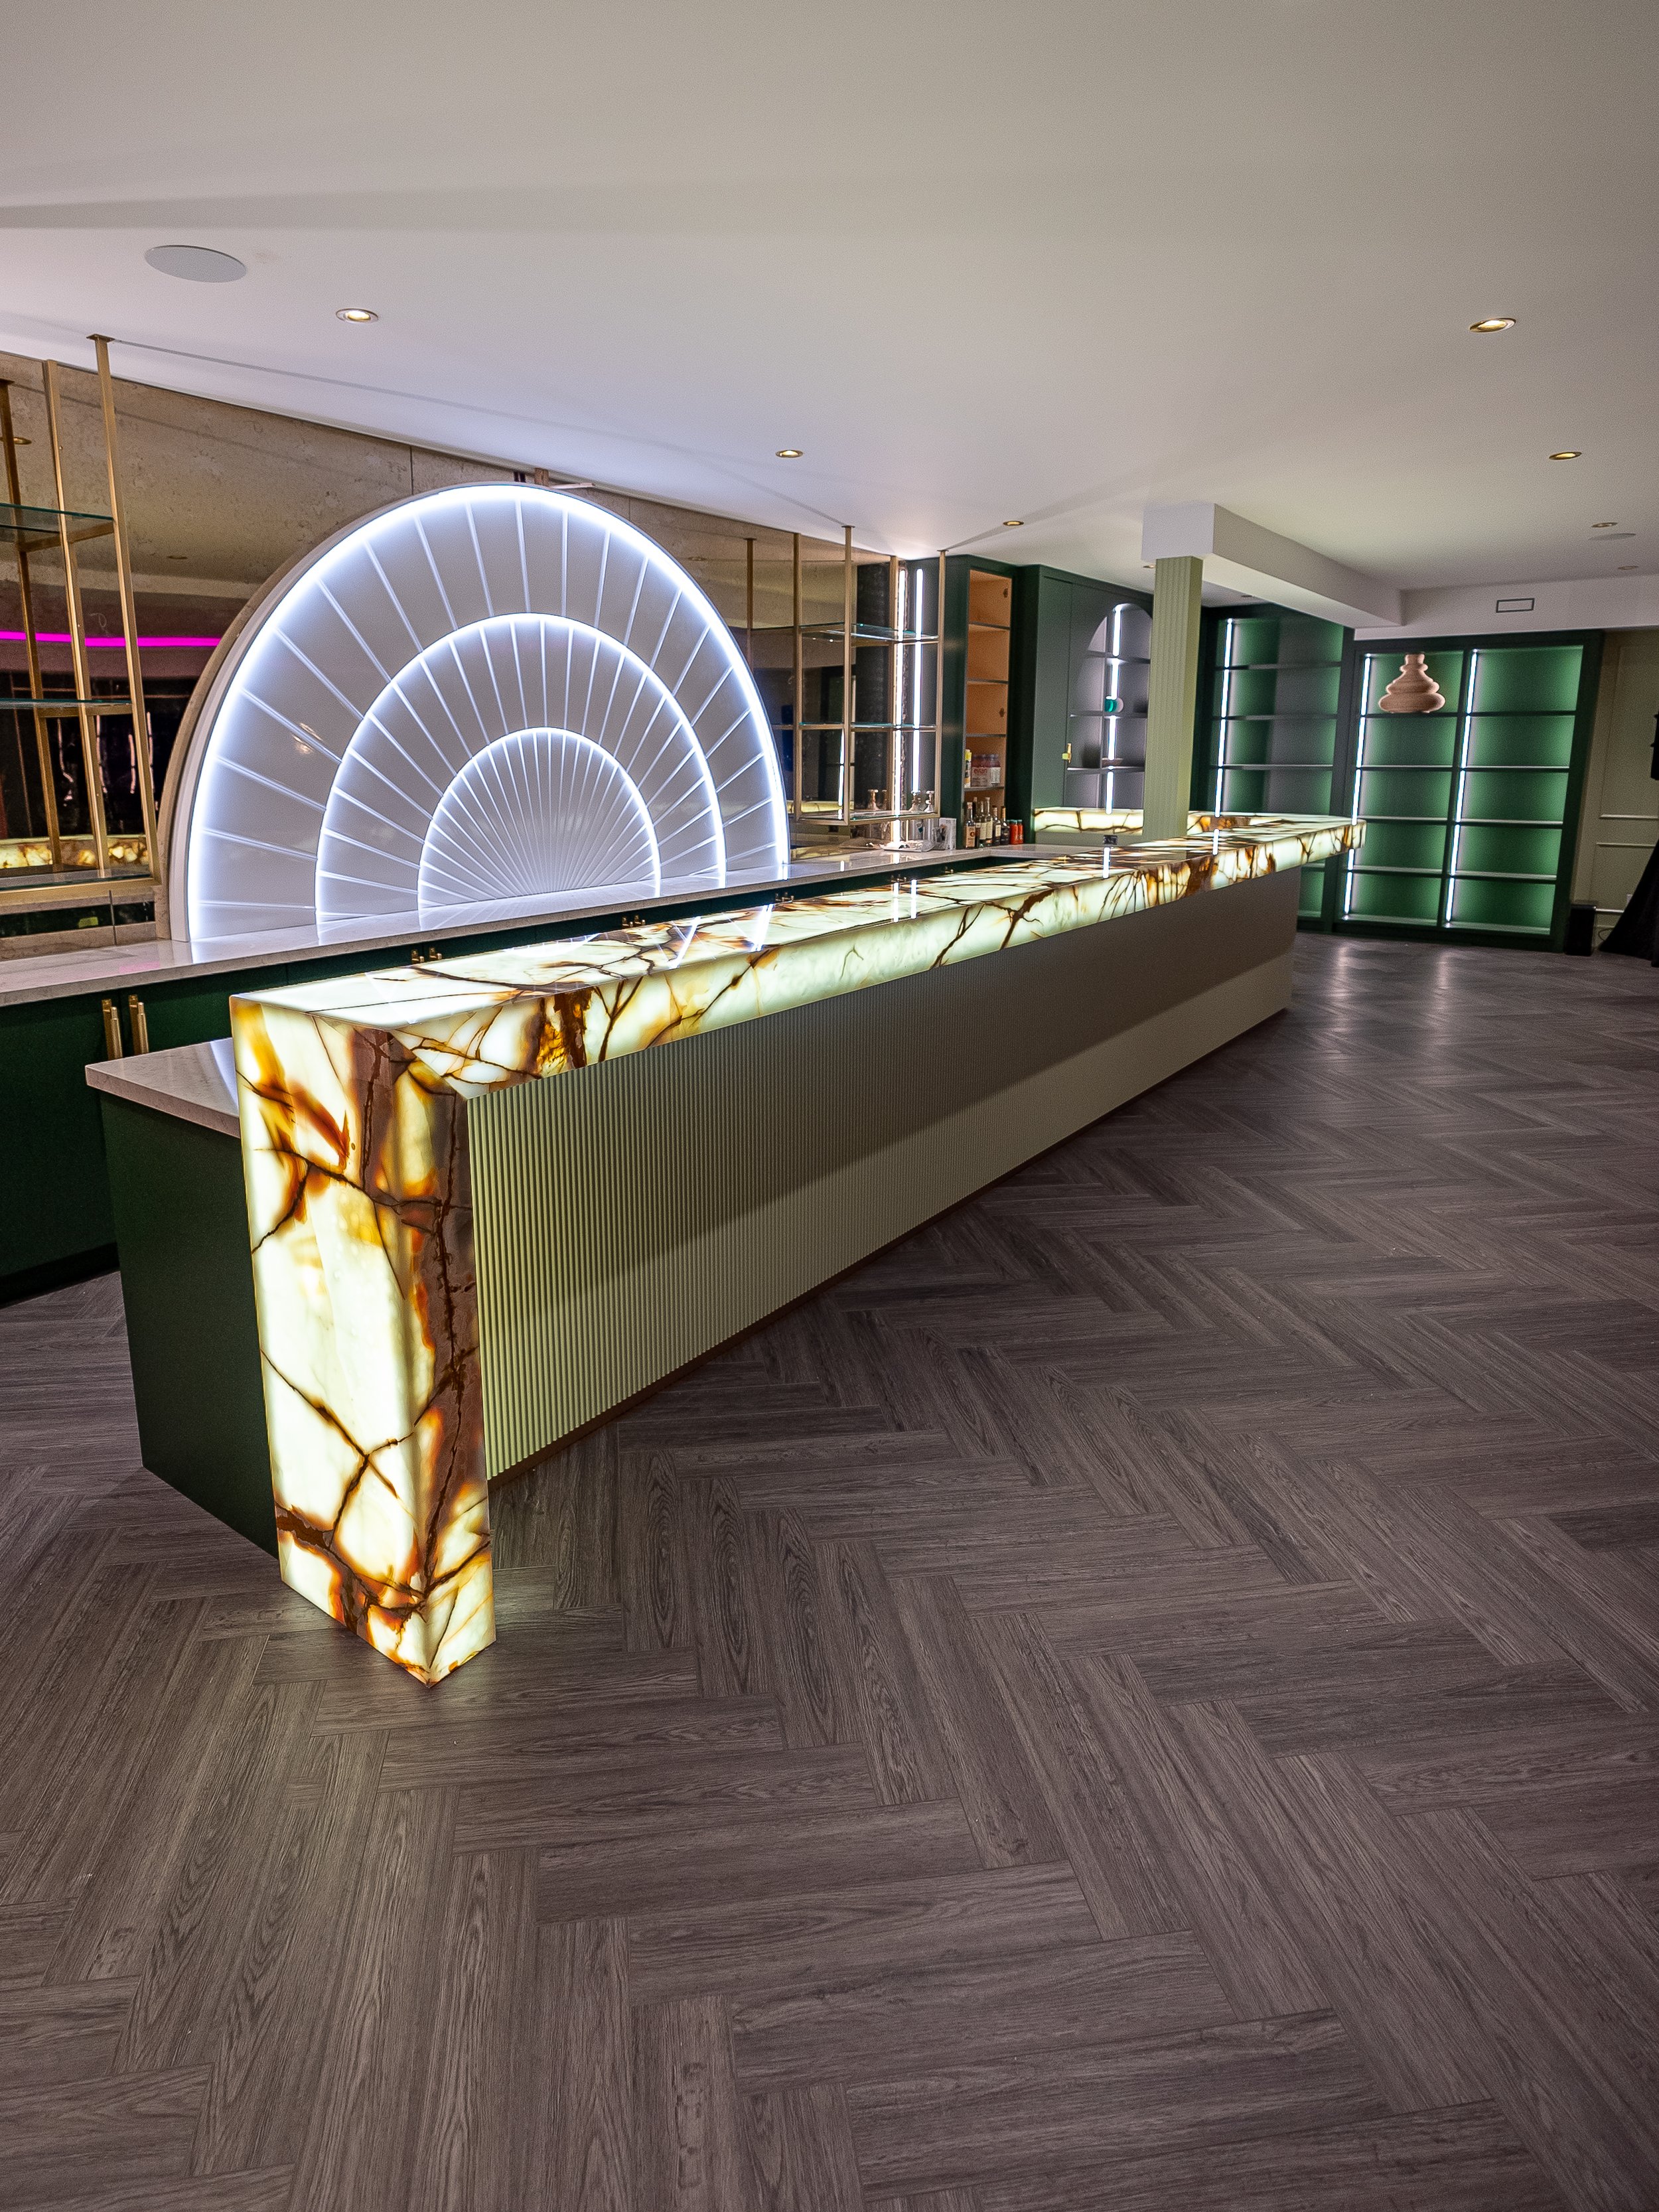  Backlit Onyx Bar &amp; Onyx vanity in this incredible Forest Hill basement bar is now fully preserved with polished PROSHIELD. All suede booths were also coated with our textile sealant. 